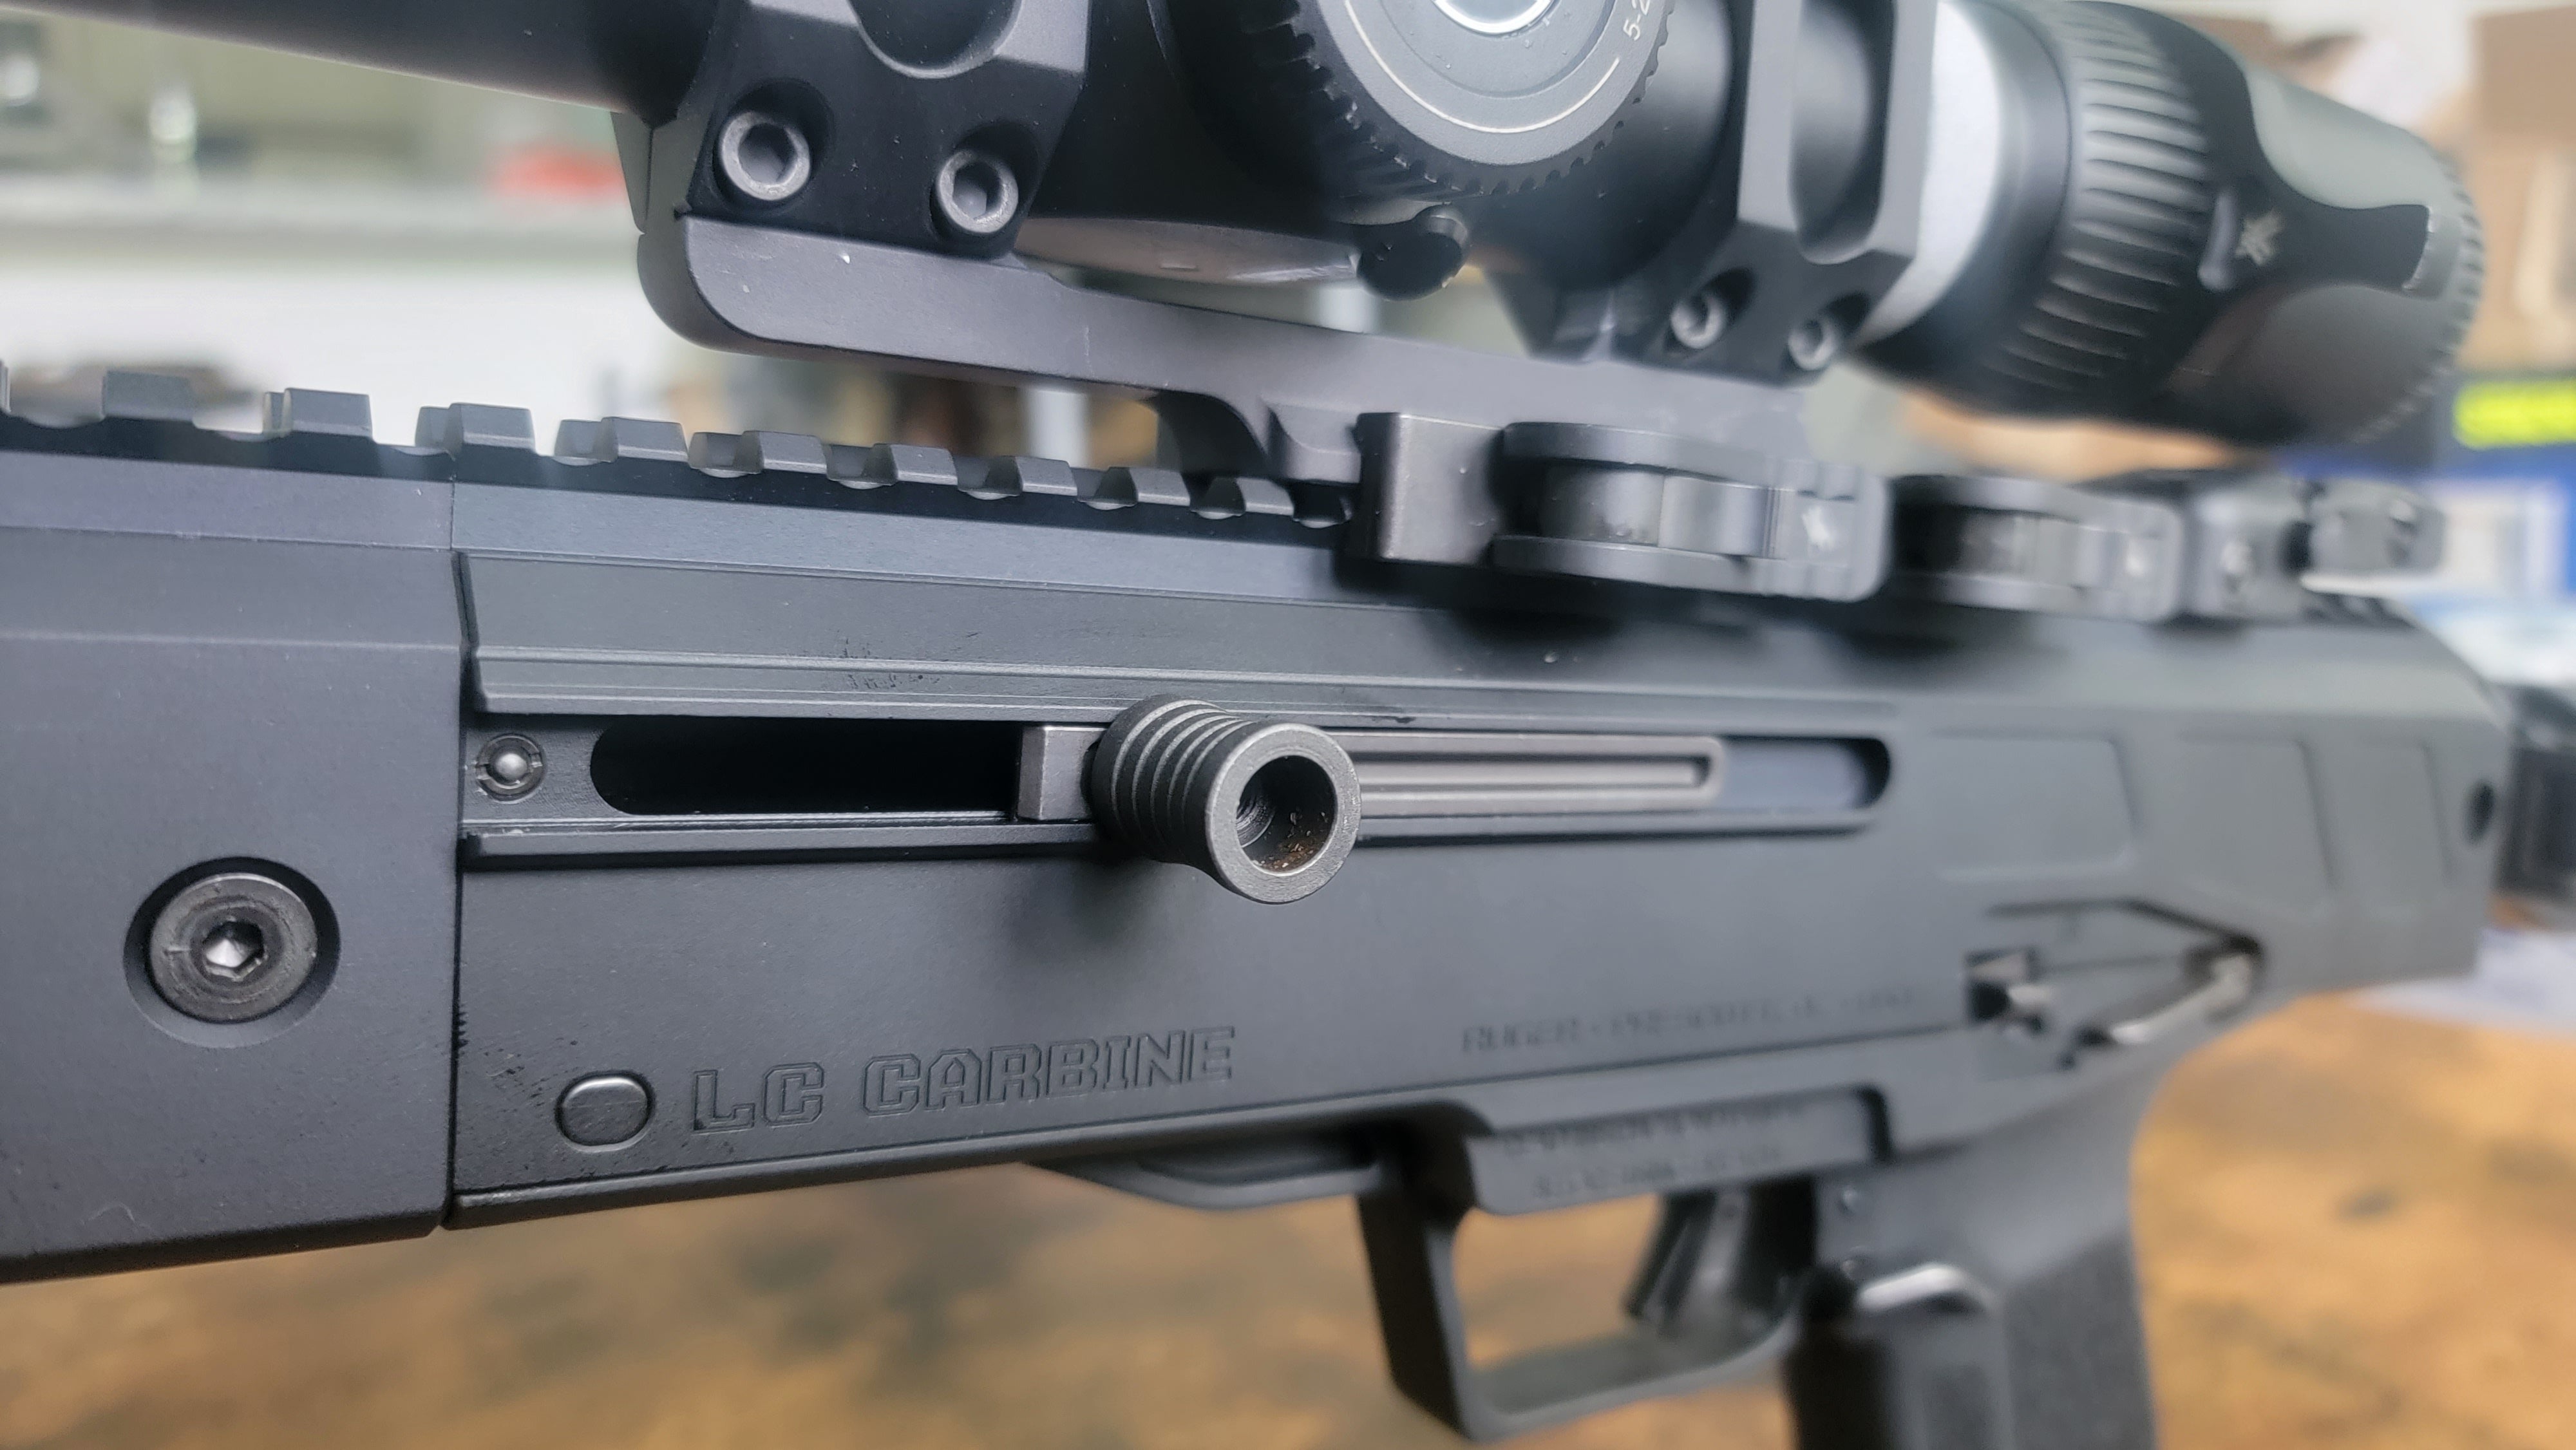 Prairie Dogs Beware: The New 5.7x28mm LC Carbine Has Arrived